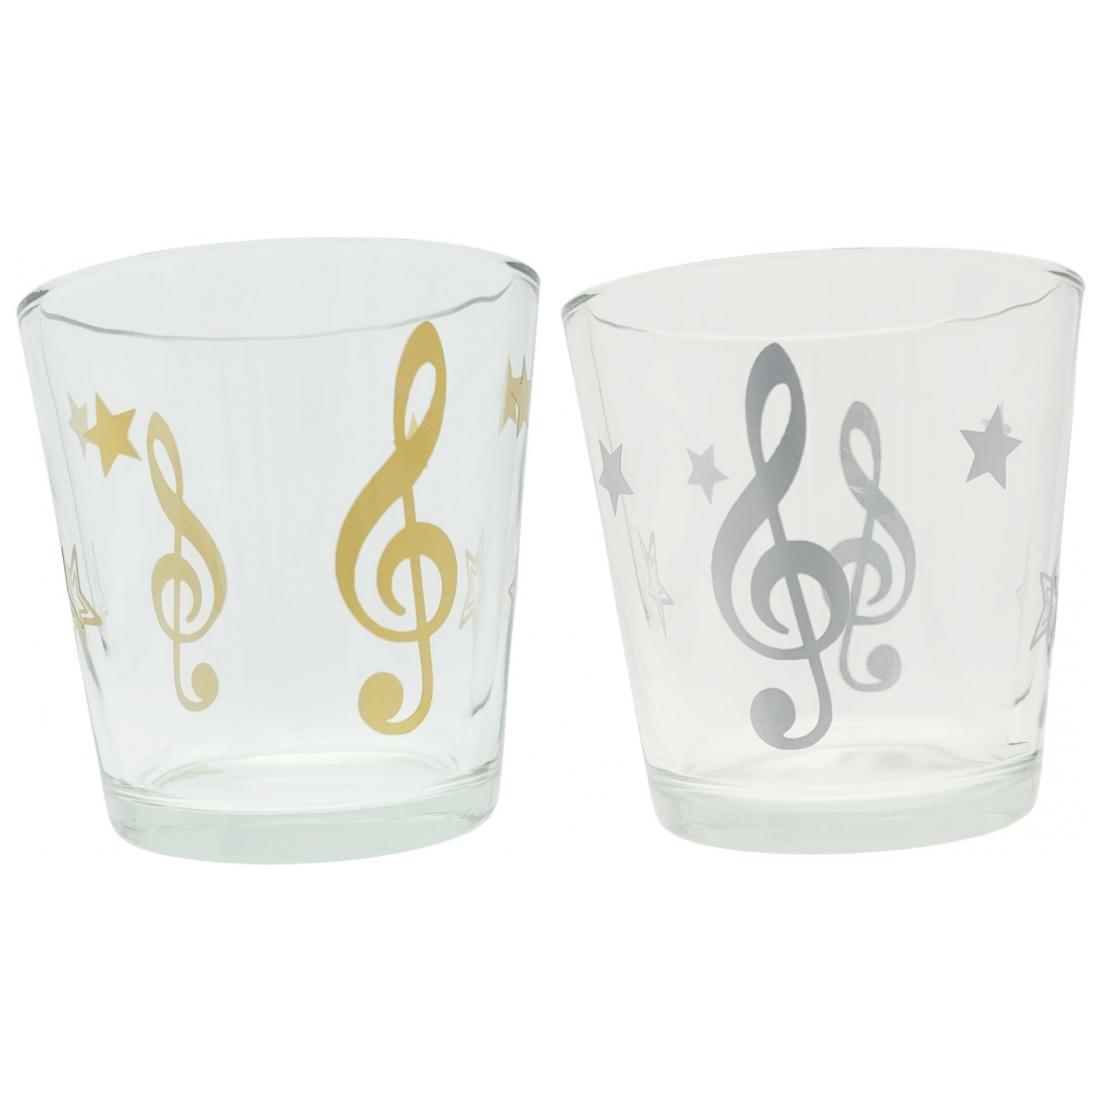 Christmassy tea light glass with treble clef and stars